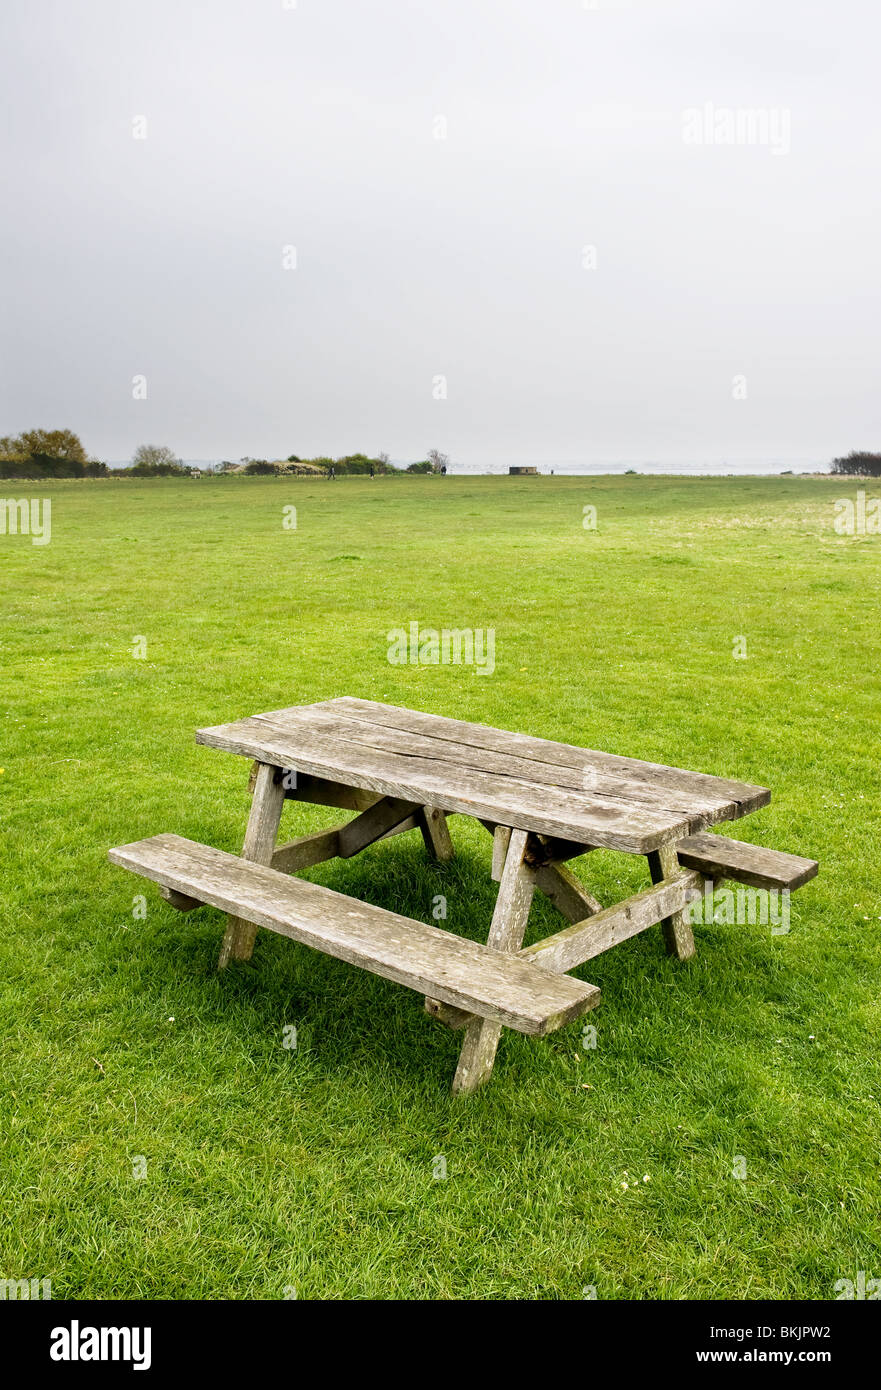 An empty wooden picnic table in a field. Stock Photo